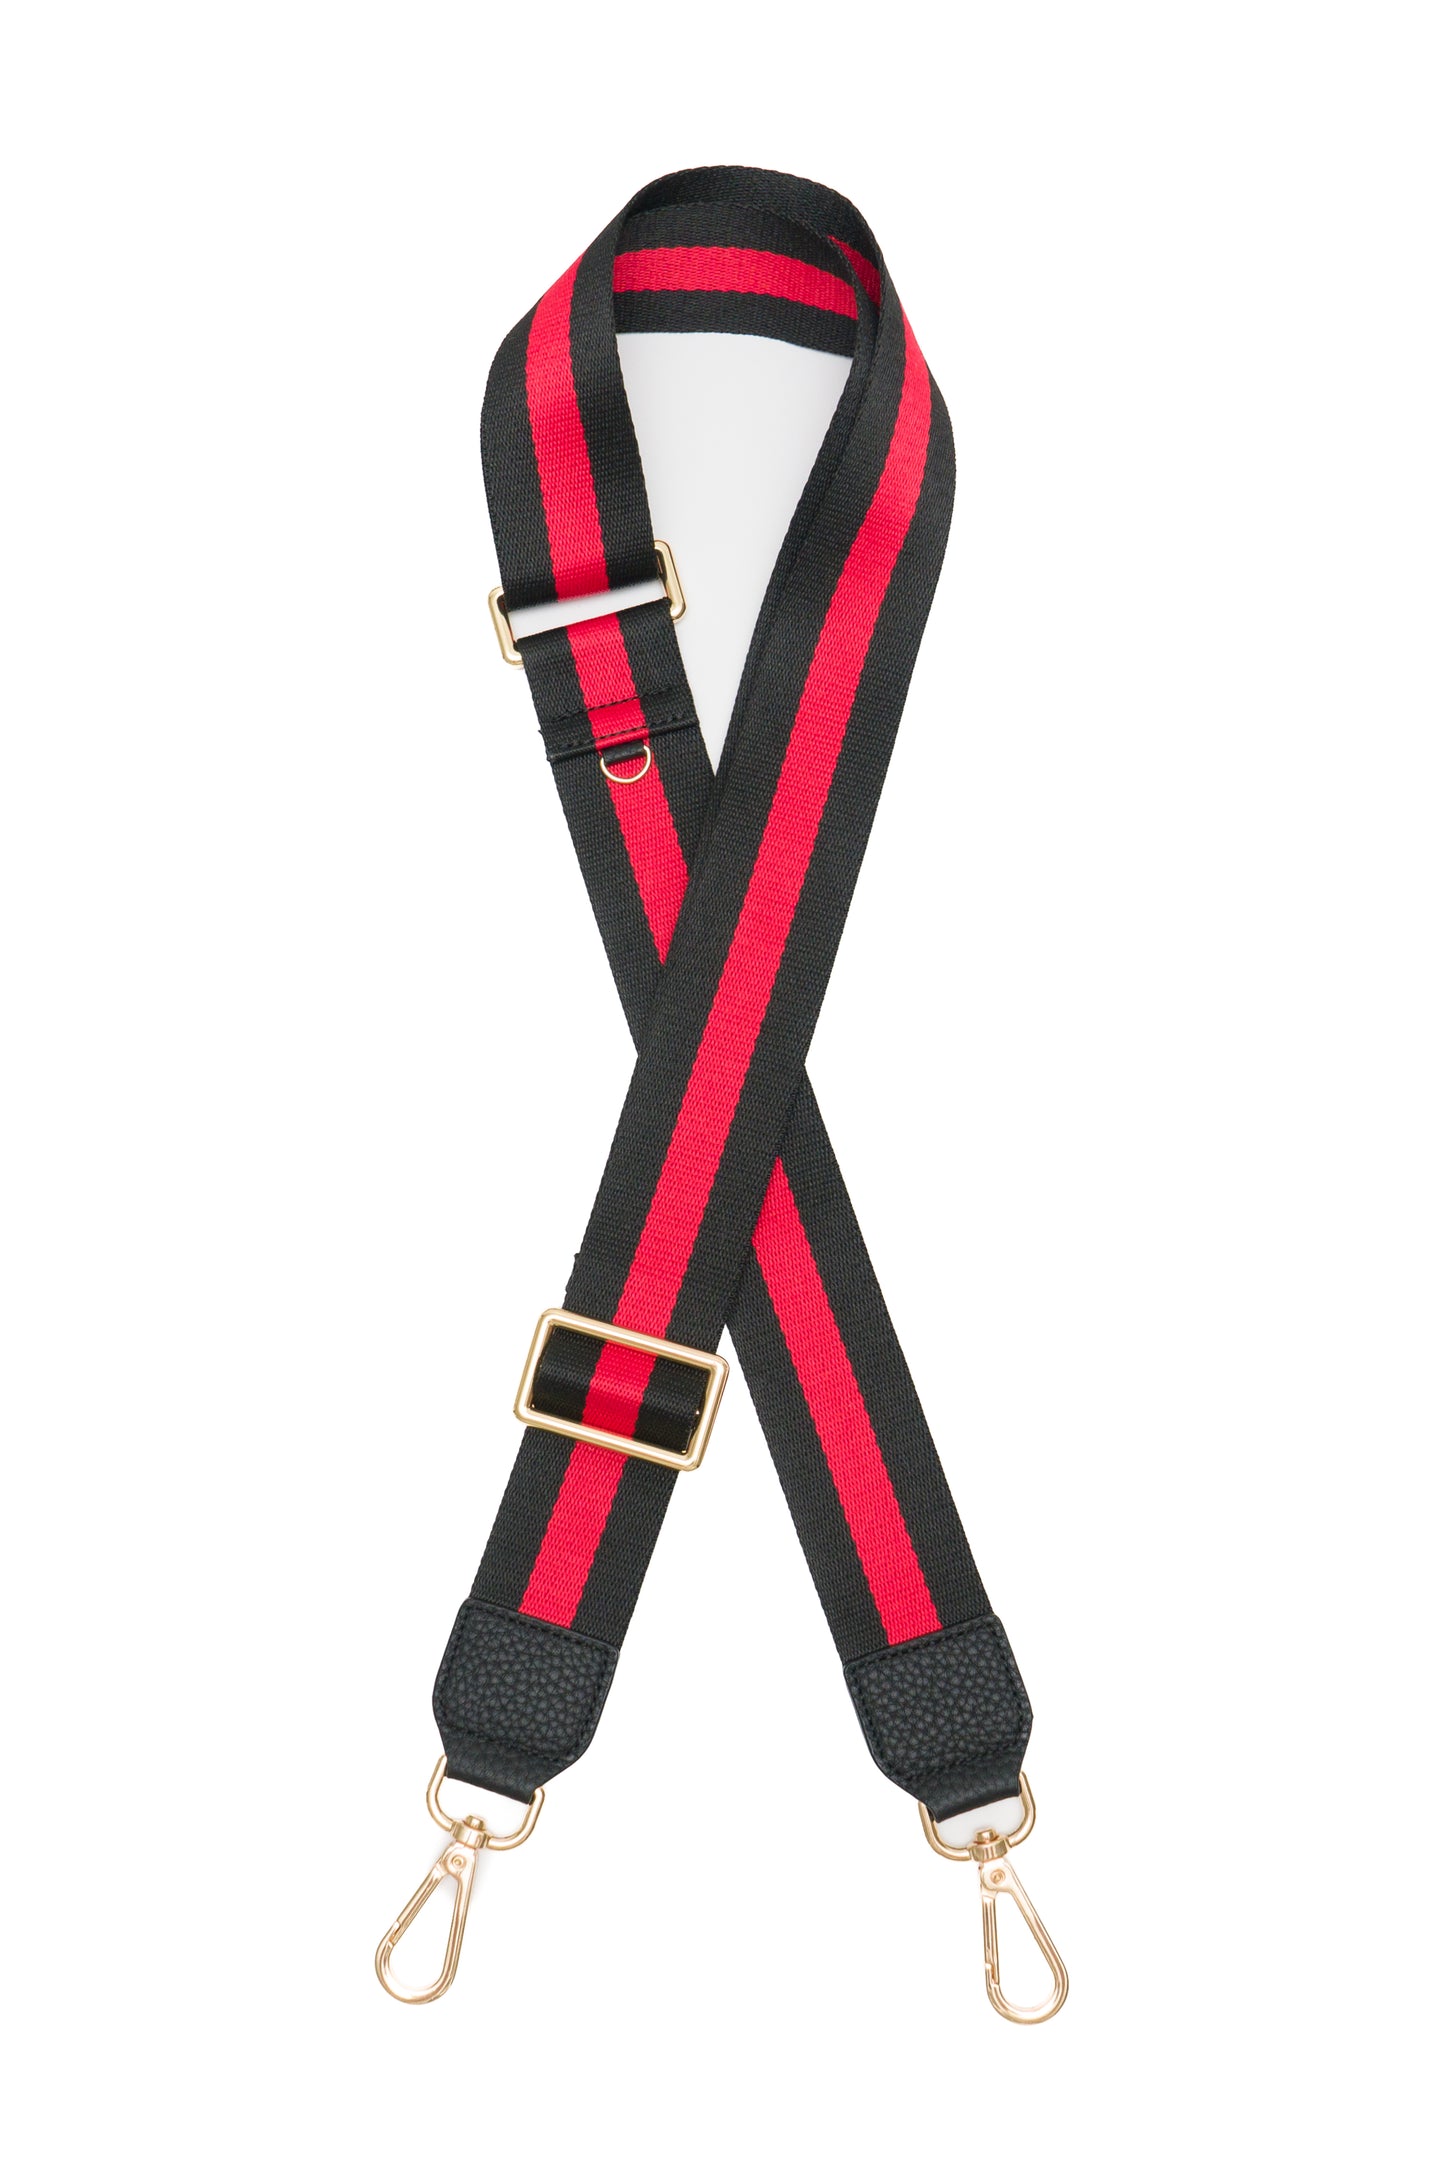 Everyday Cover with Red & Black Strap